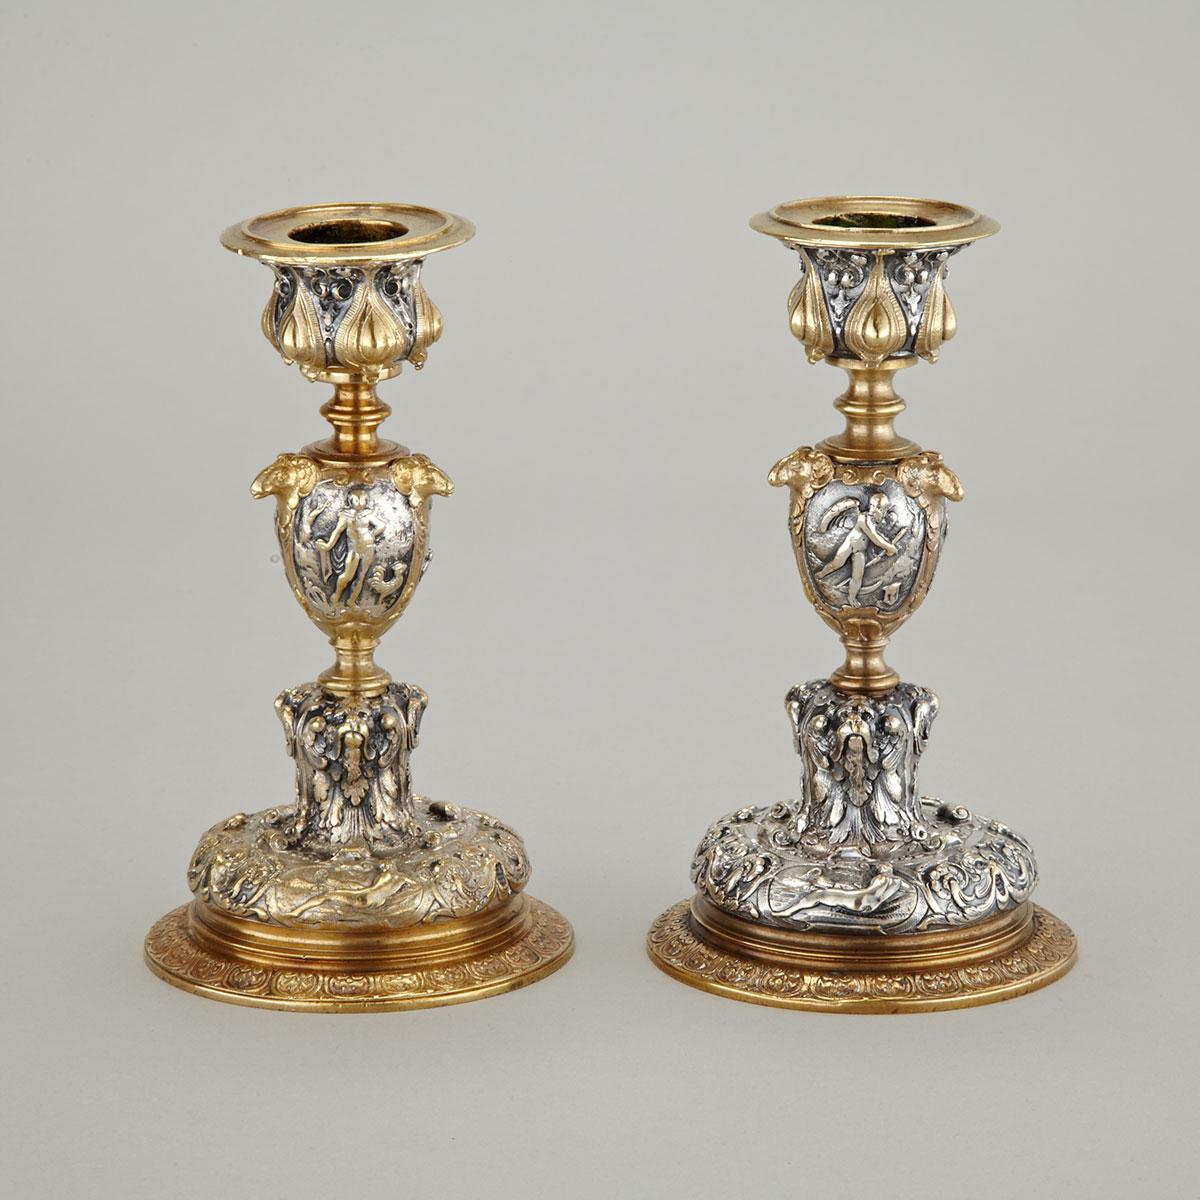 Pair of French Renaissance Style Gilt and Silvered Bronze Candlesticks, Henri Picard, 19th century